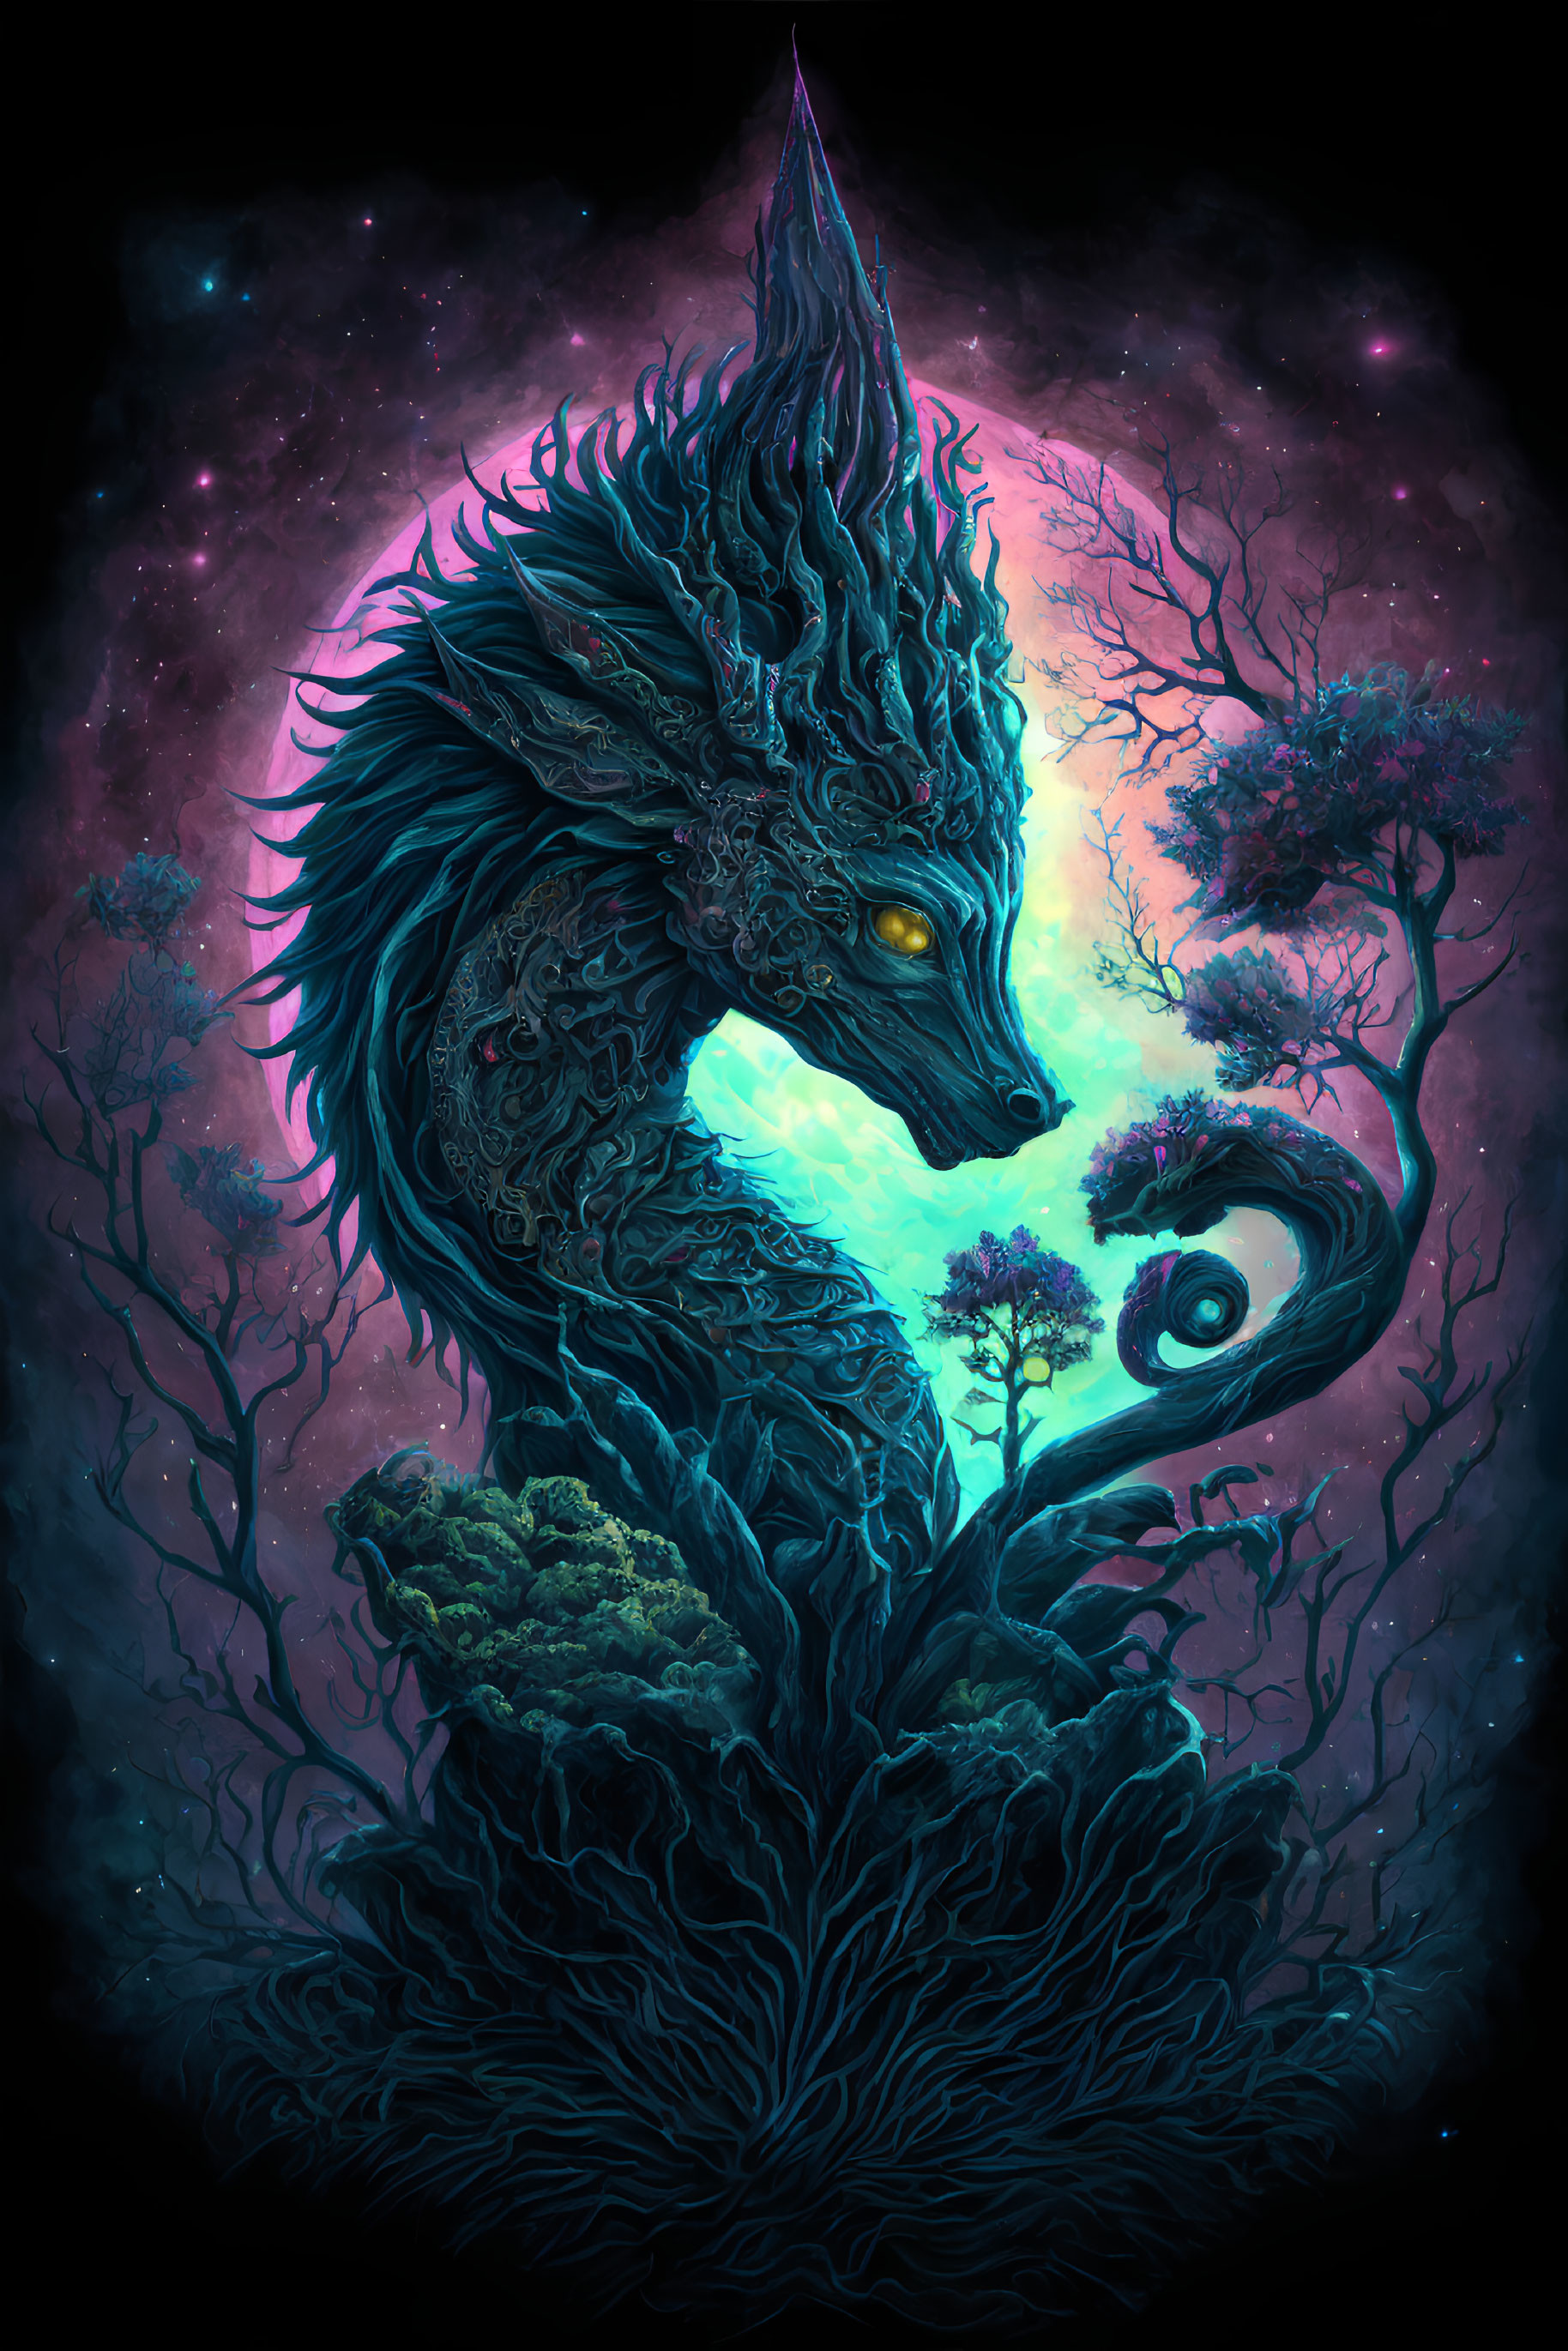 Dragon entwined with glowing foliage in mystical night scene